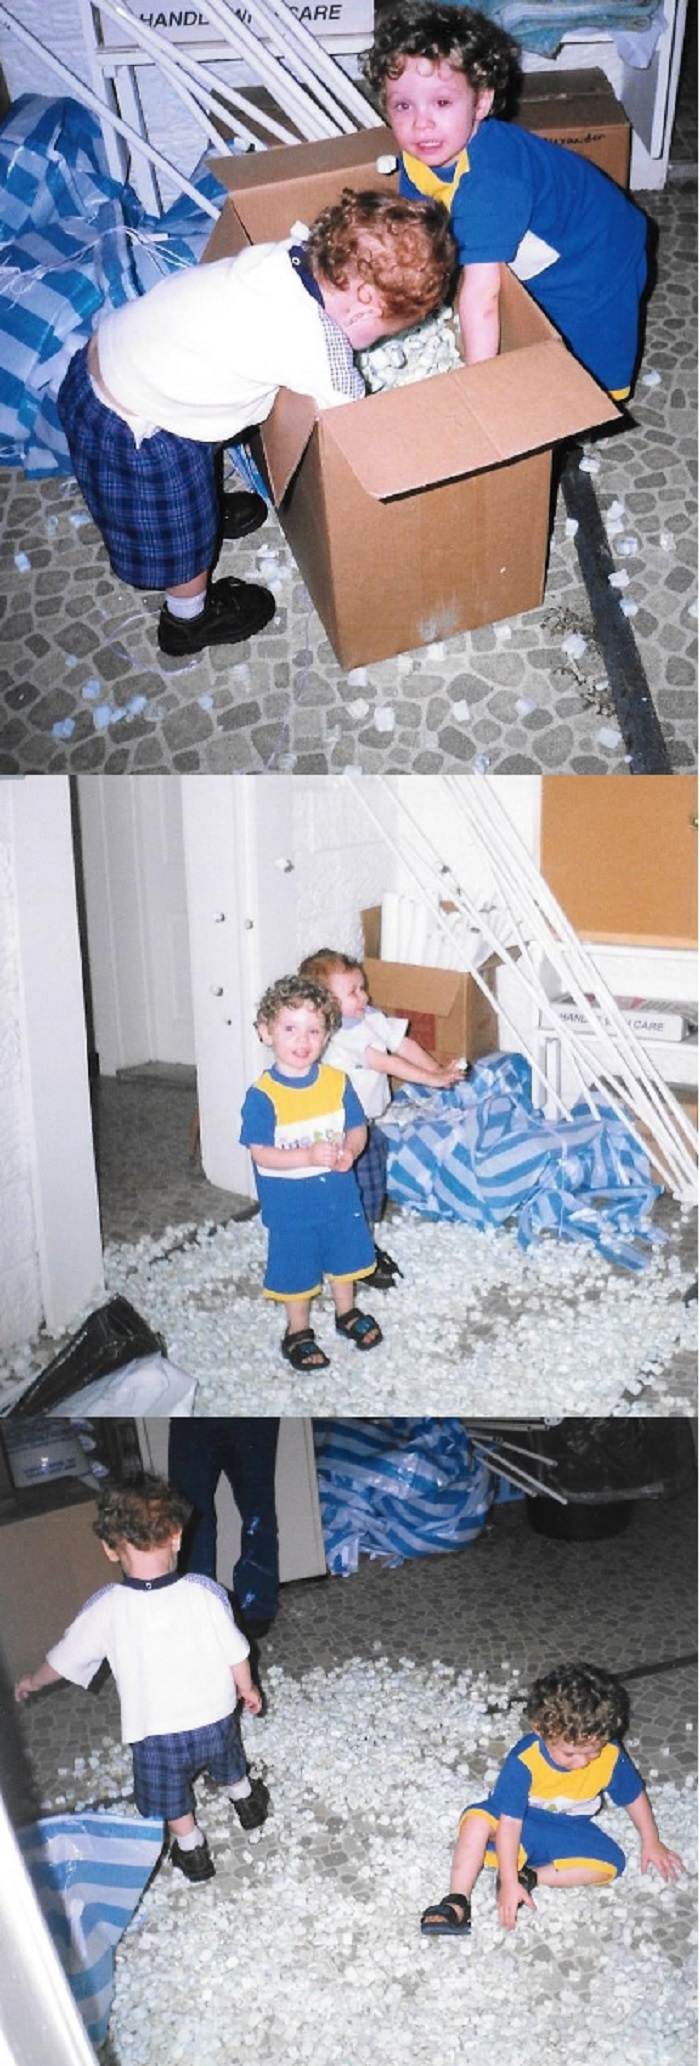 Our Nephews, The Ring Bearers (my Sister's Boy And My Sister-in-law's Boy) After The Wedding Rehearsal. They Found One Of The Gifts That Had Been Sent And "helped" Unpack It While The Grownups Were Getting Food Ready...(1999).